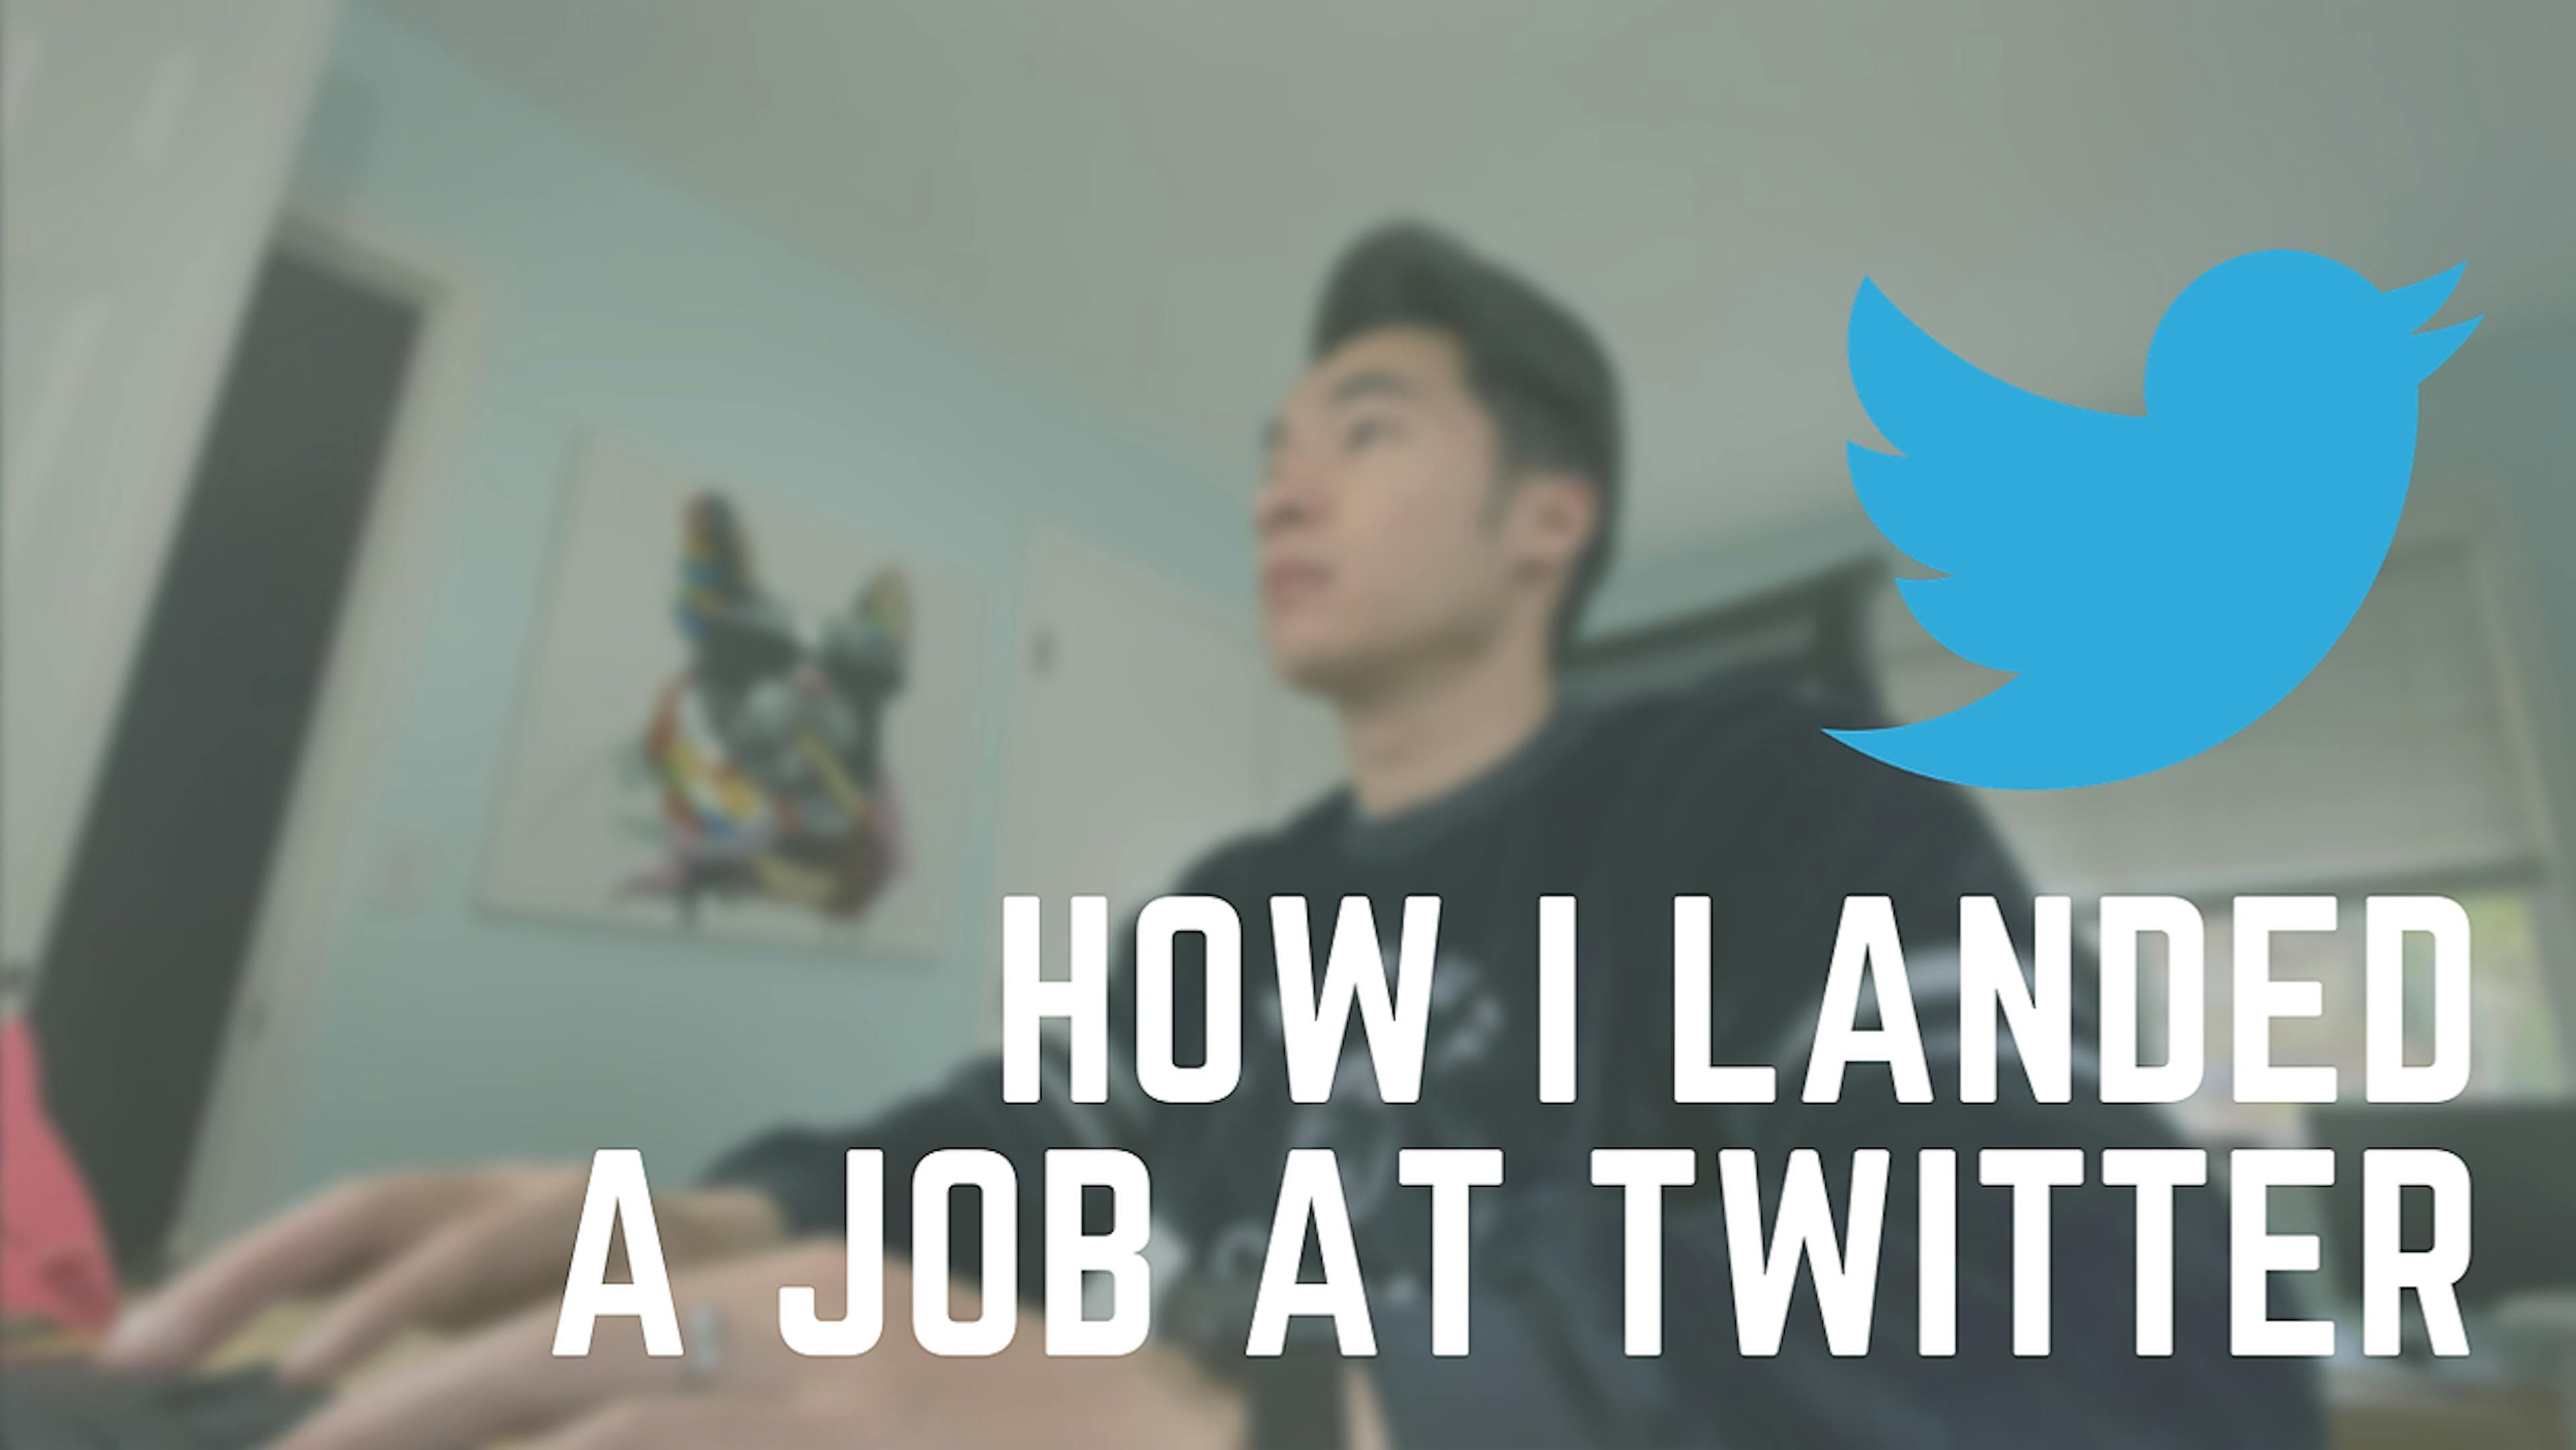 featured image - Landing A Job At Twitter As A Software Engineer [How I Did It]